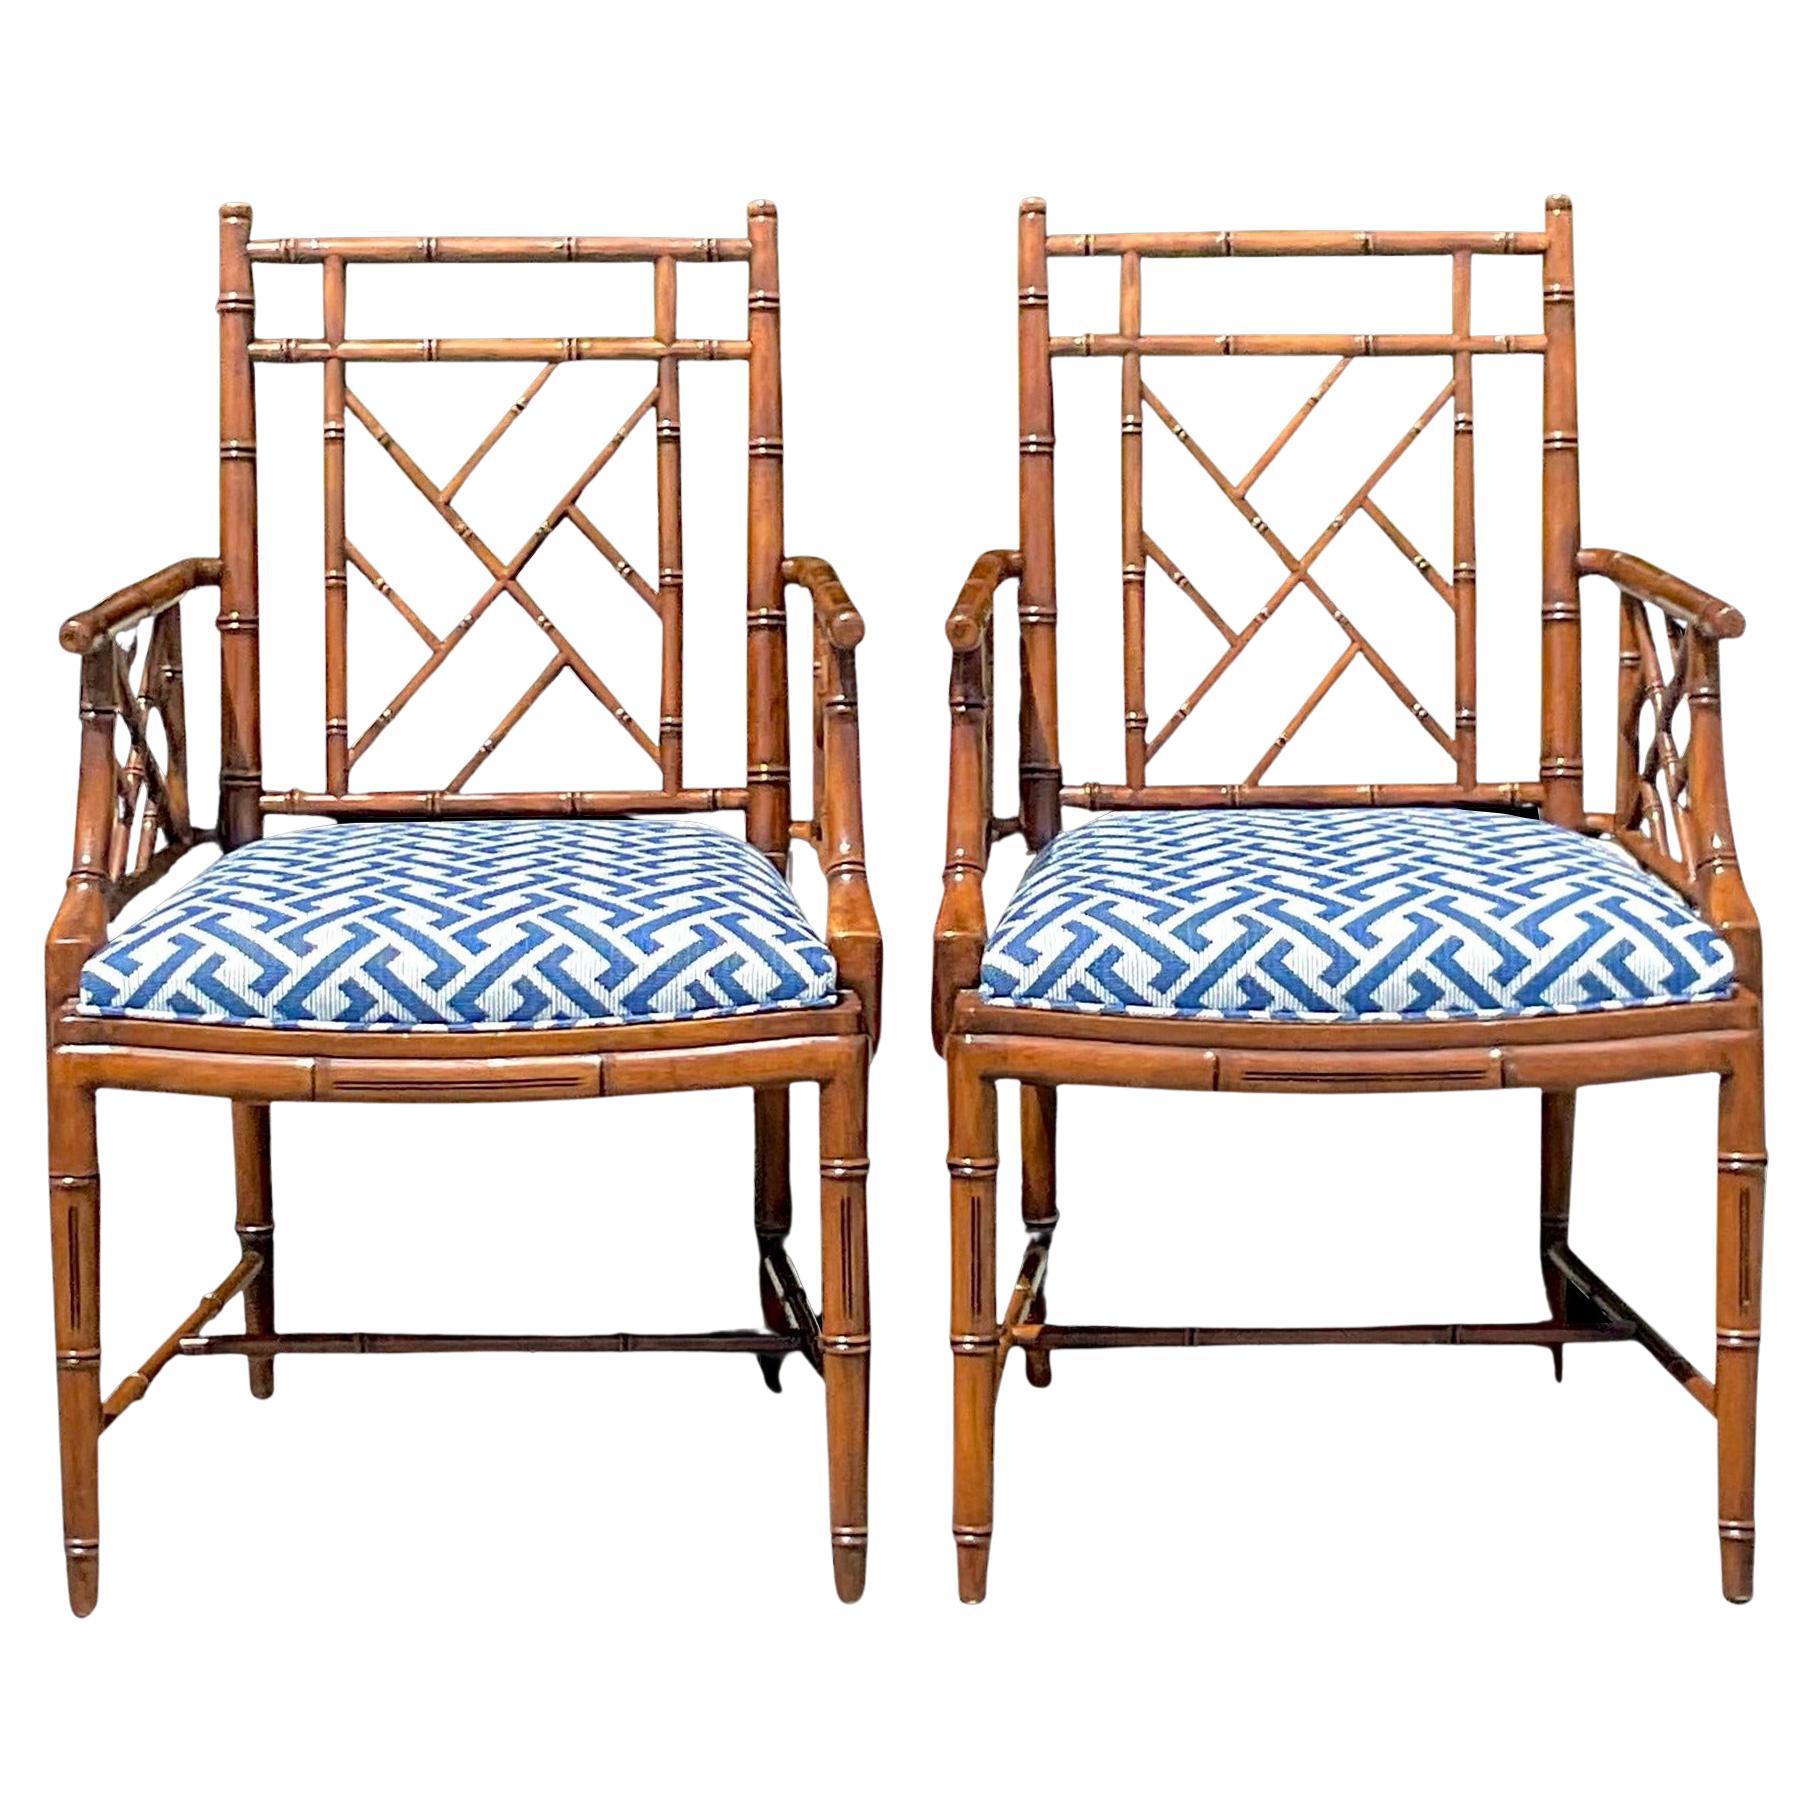 Vintage Regency William Switzer Chinese Chippendale Arm Chairs - a Pair